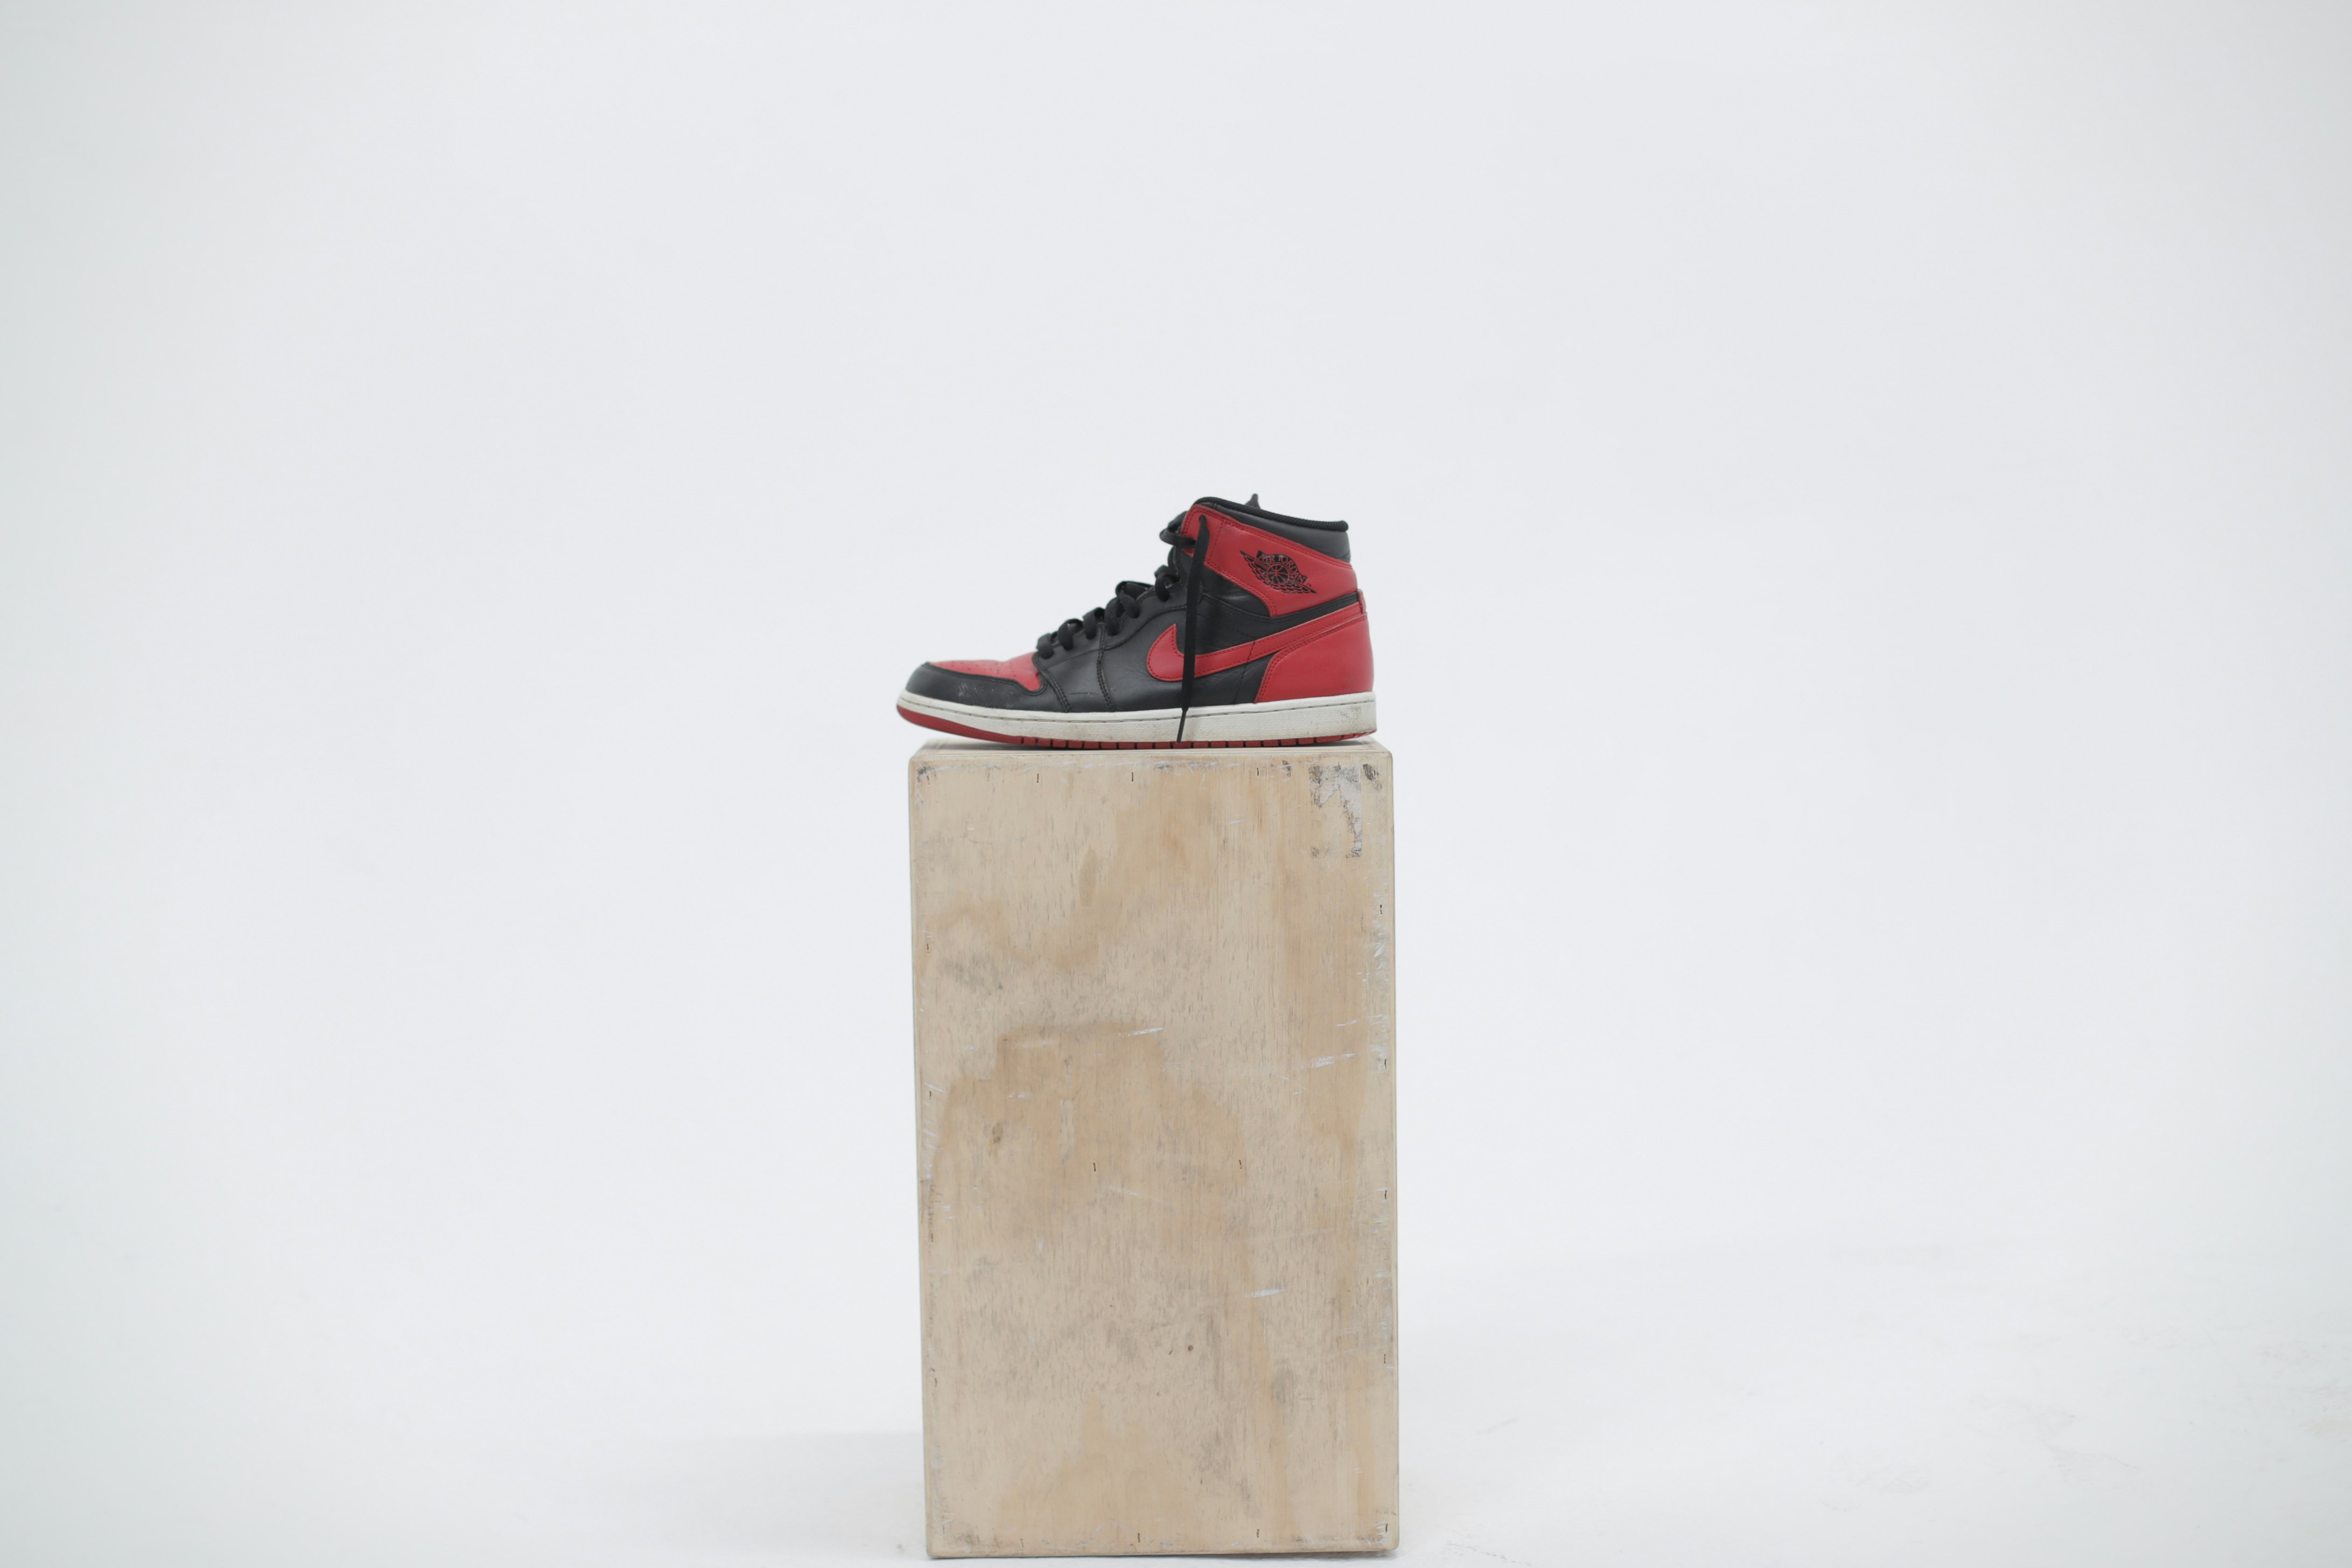 unpaired black and red Air Jordan 1 shoe on wooden box